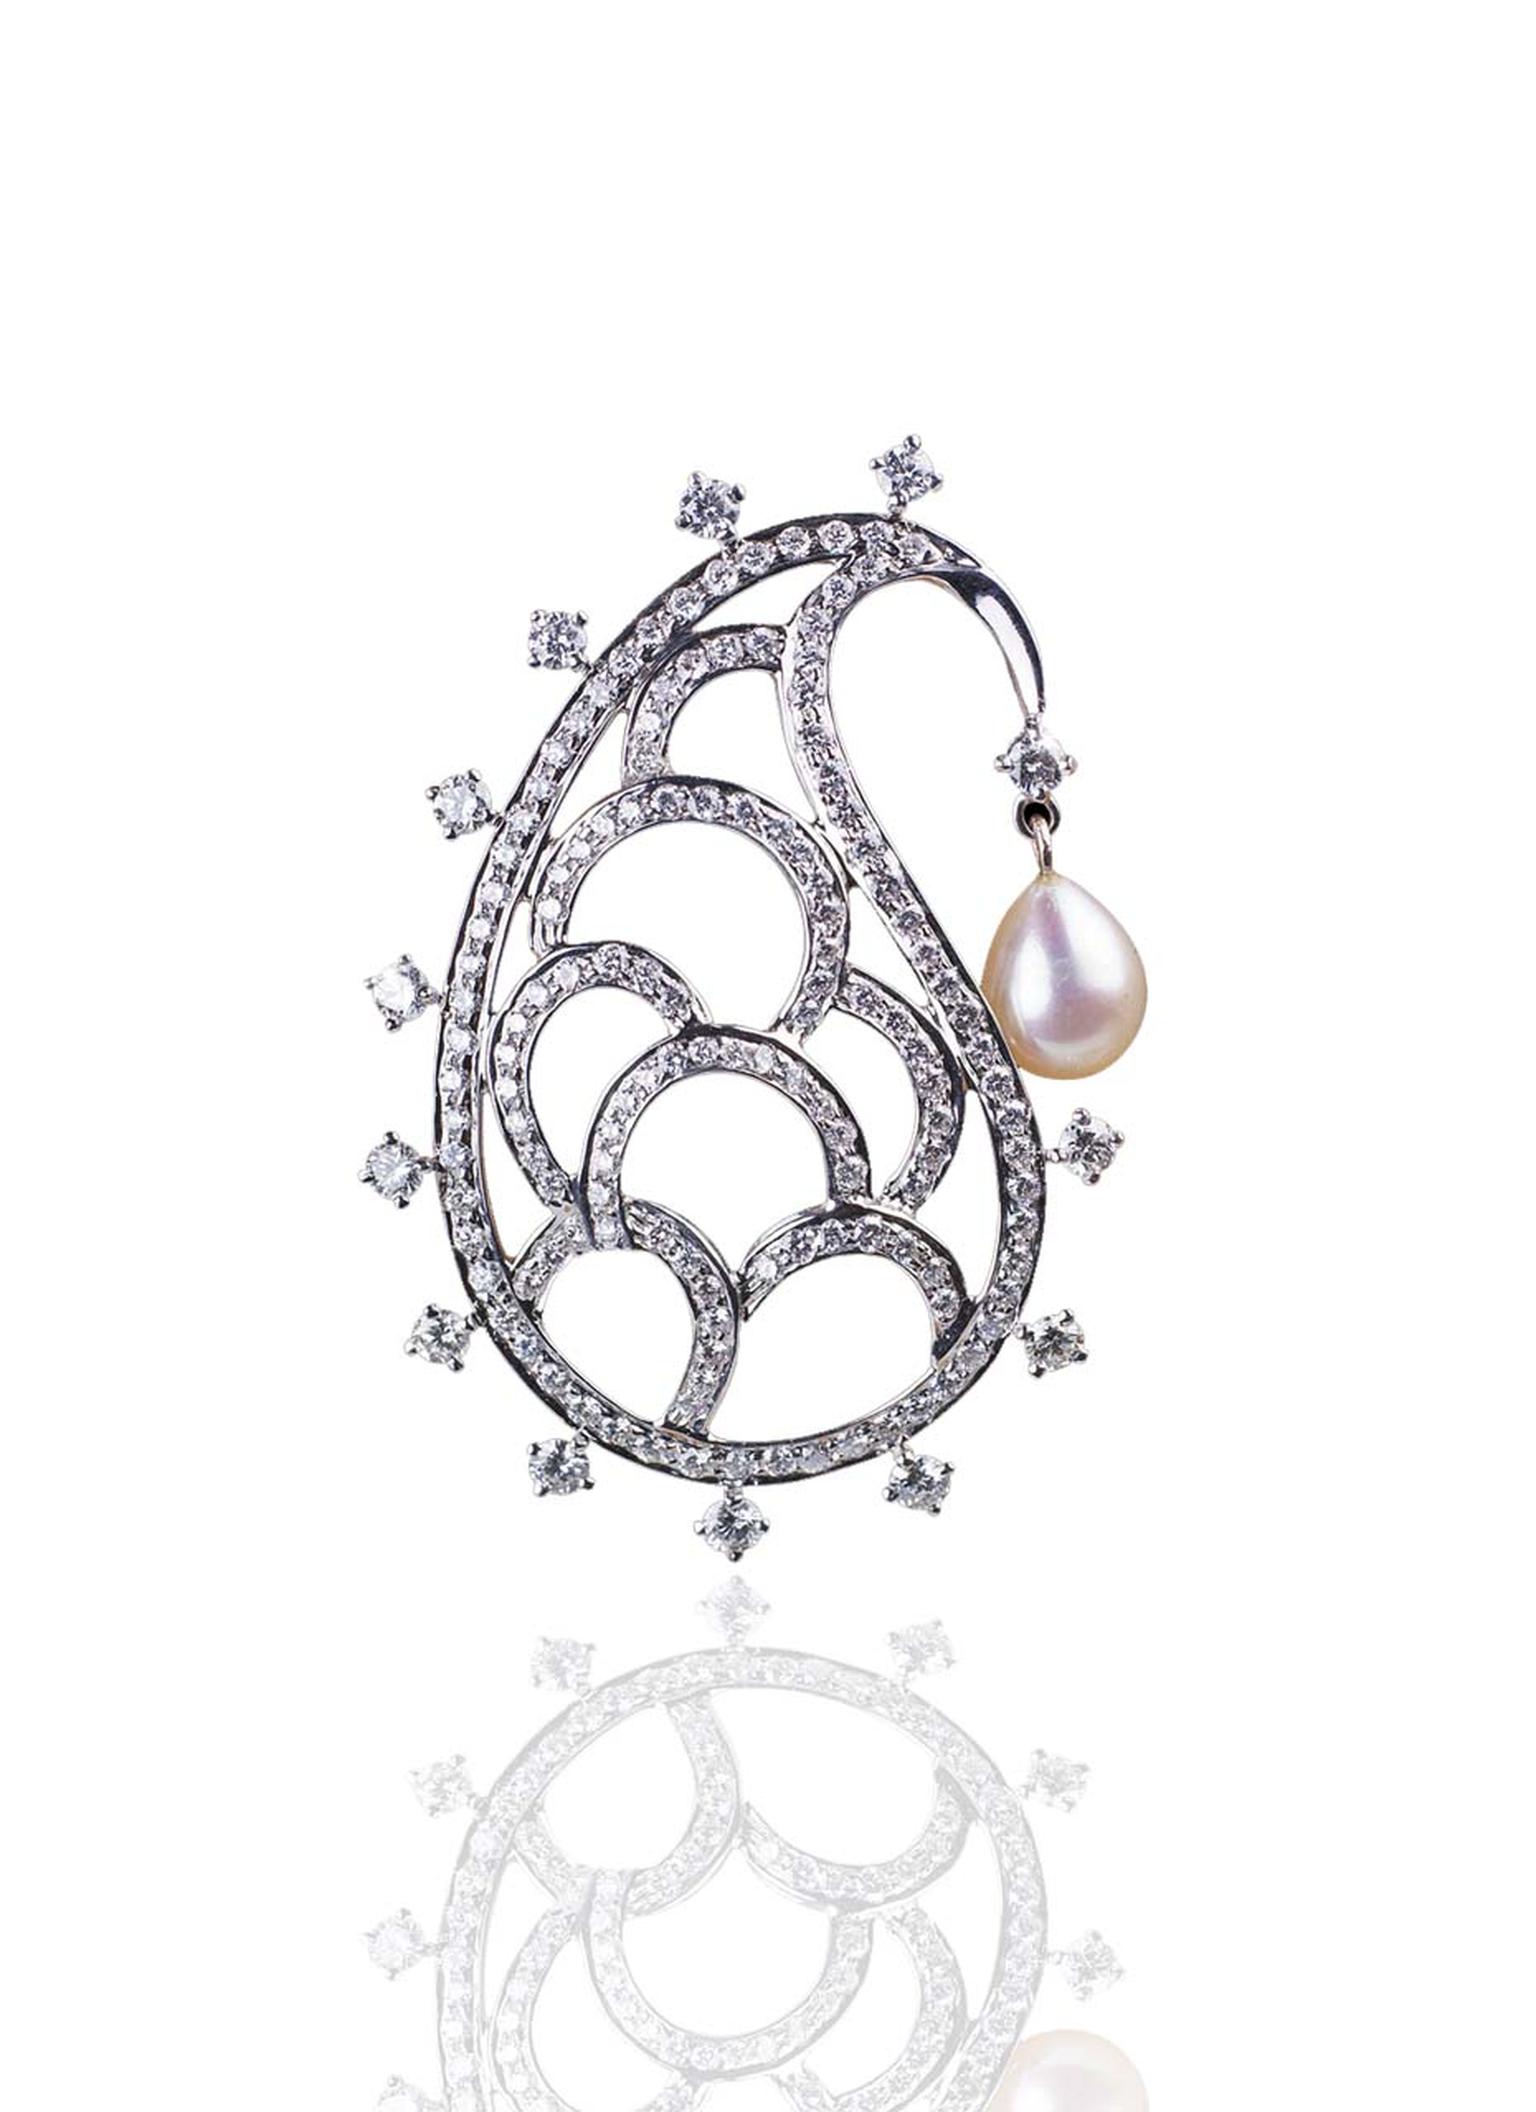 Mirari’s Paisley brooch in white gold with five drop-shaped pearls and diamonds.